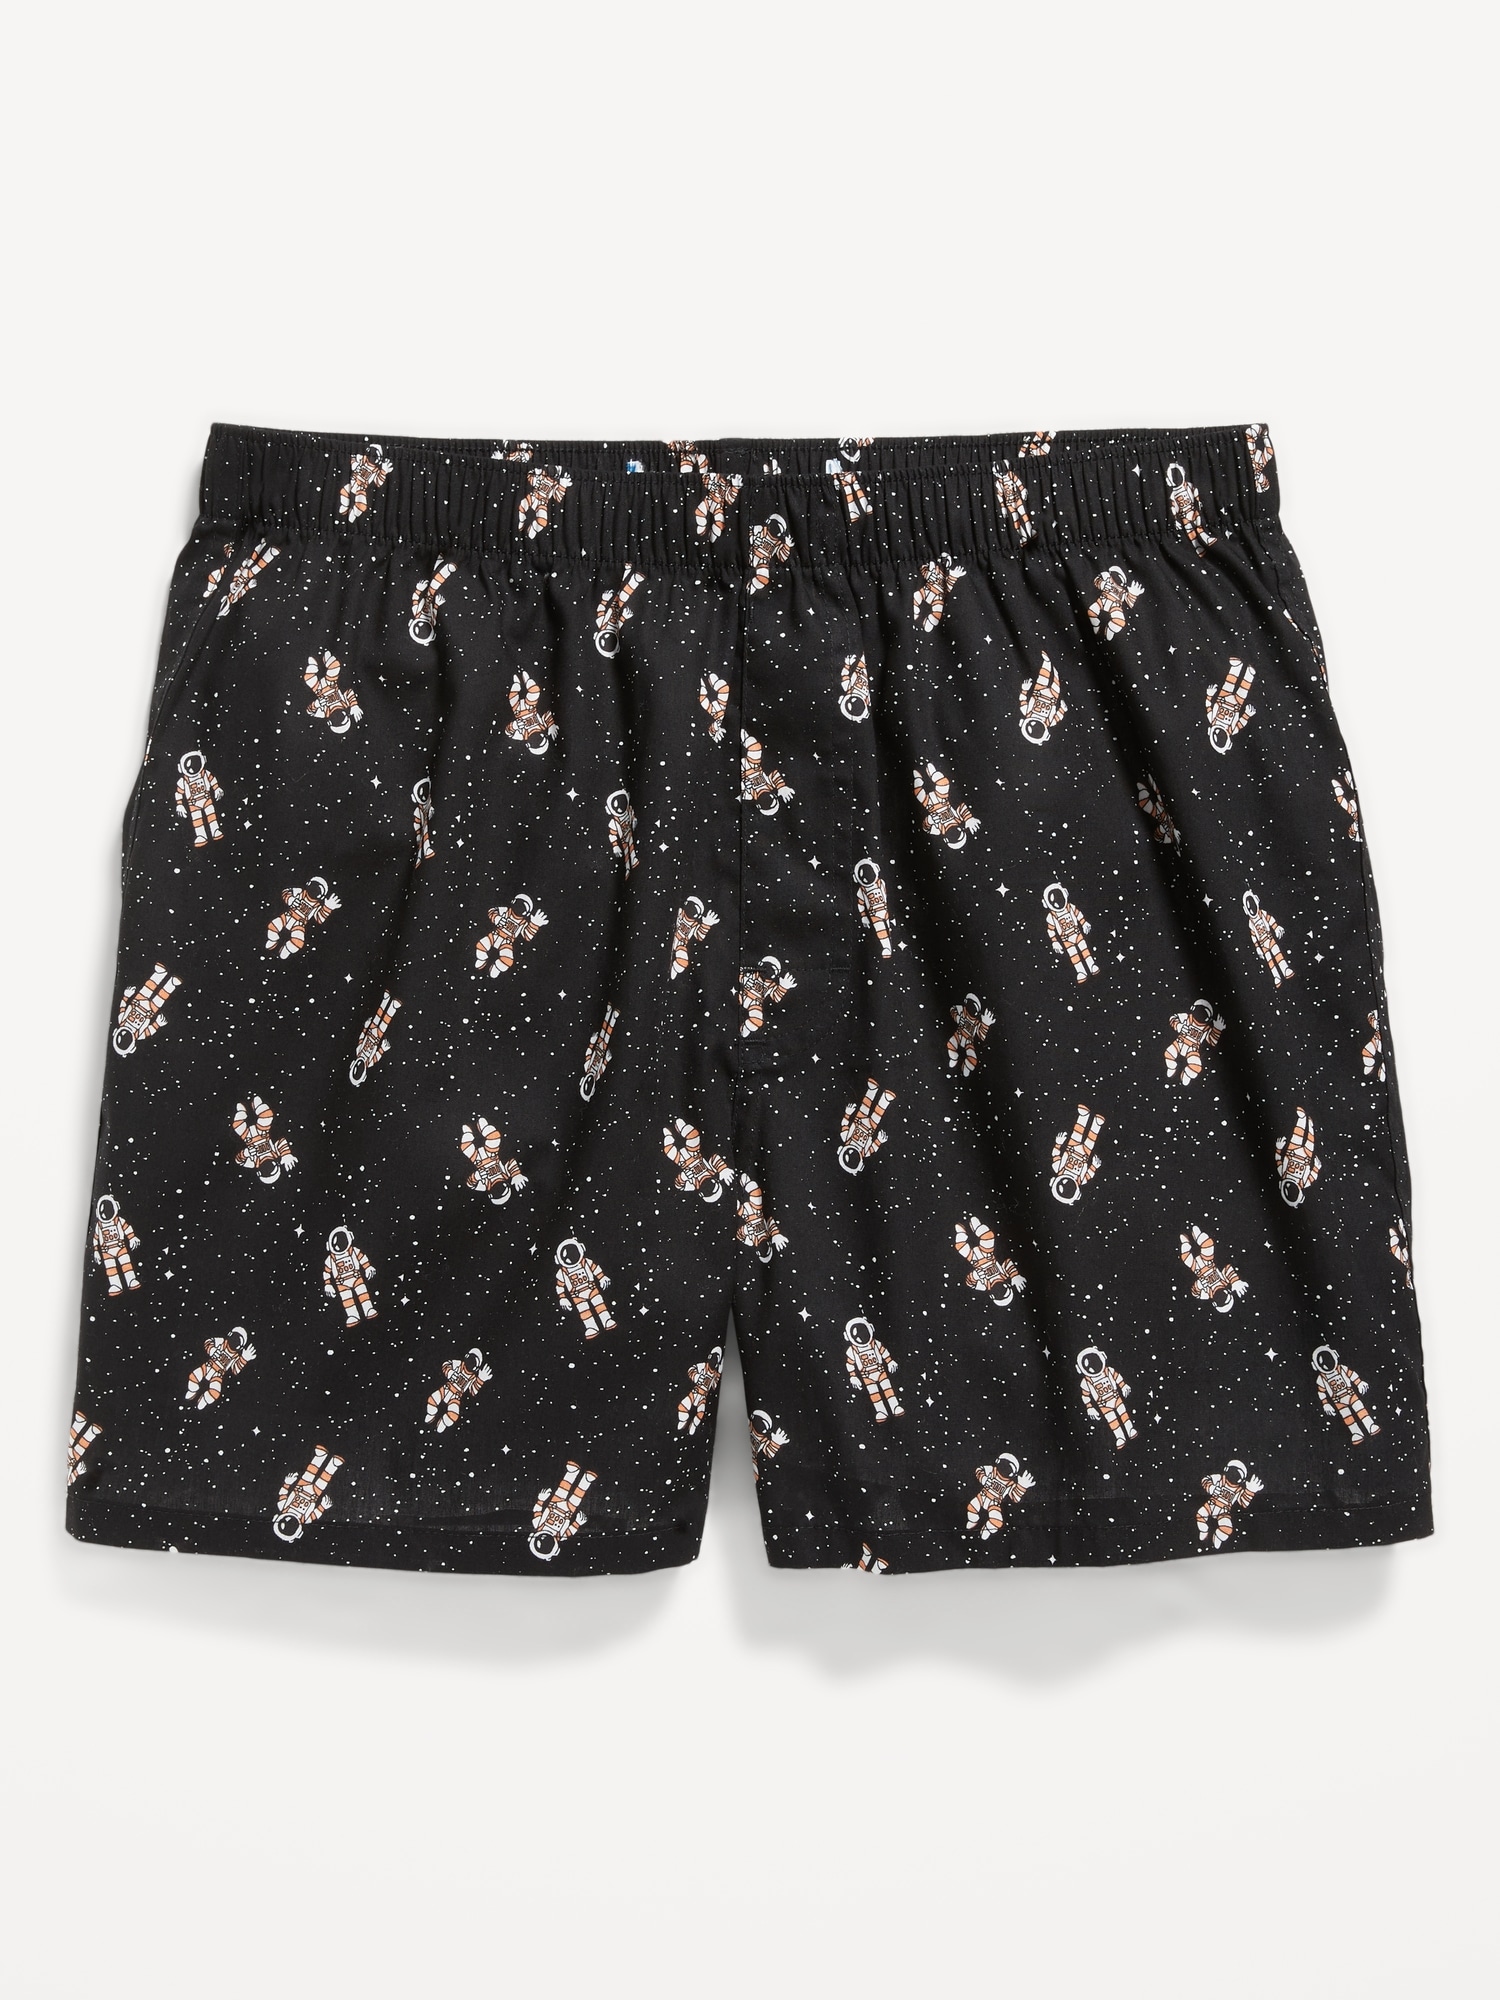 Valentines day cotton shorts for men